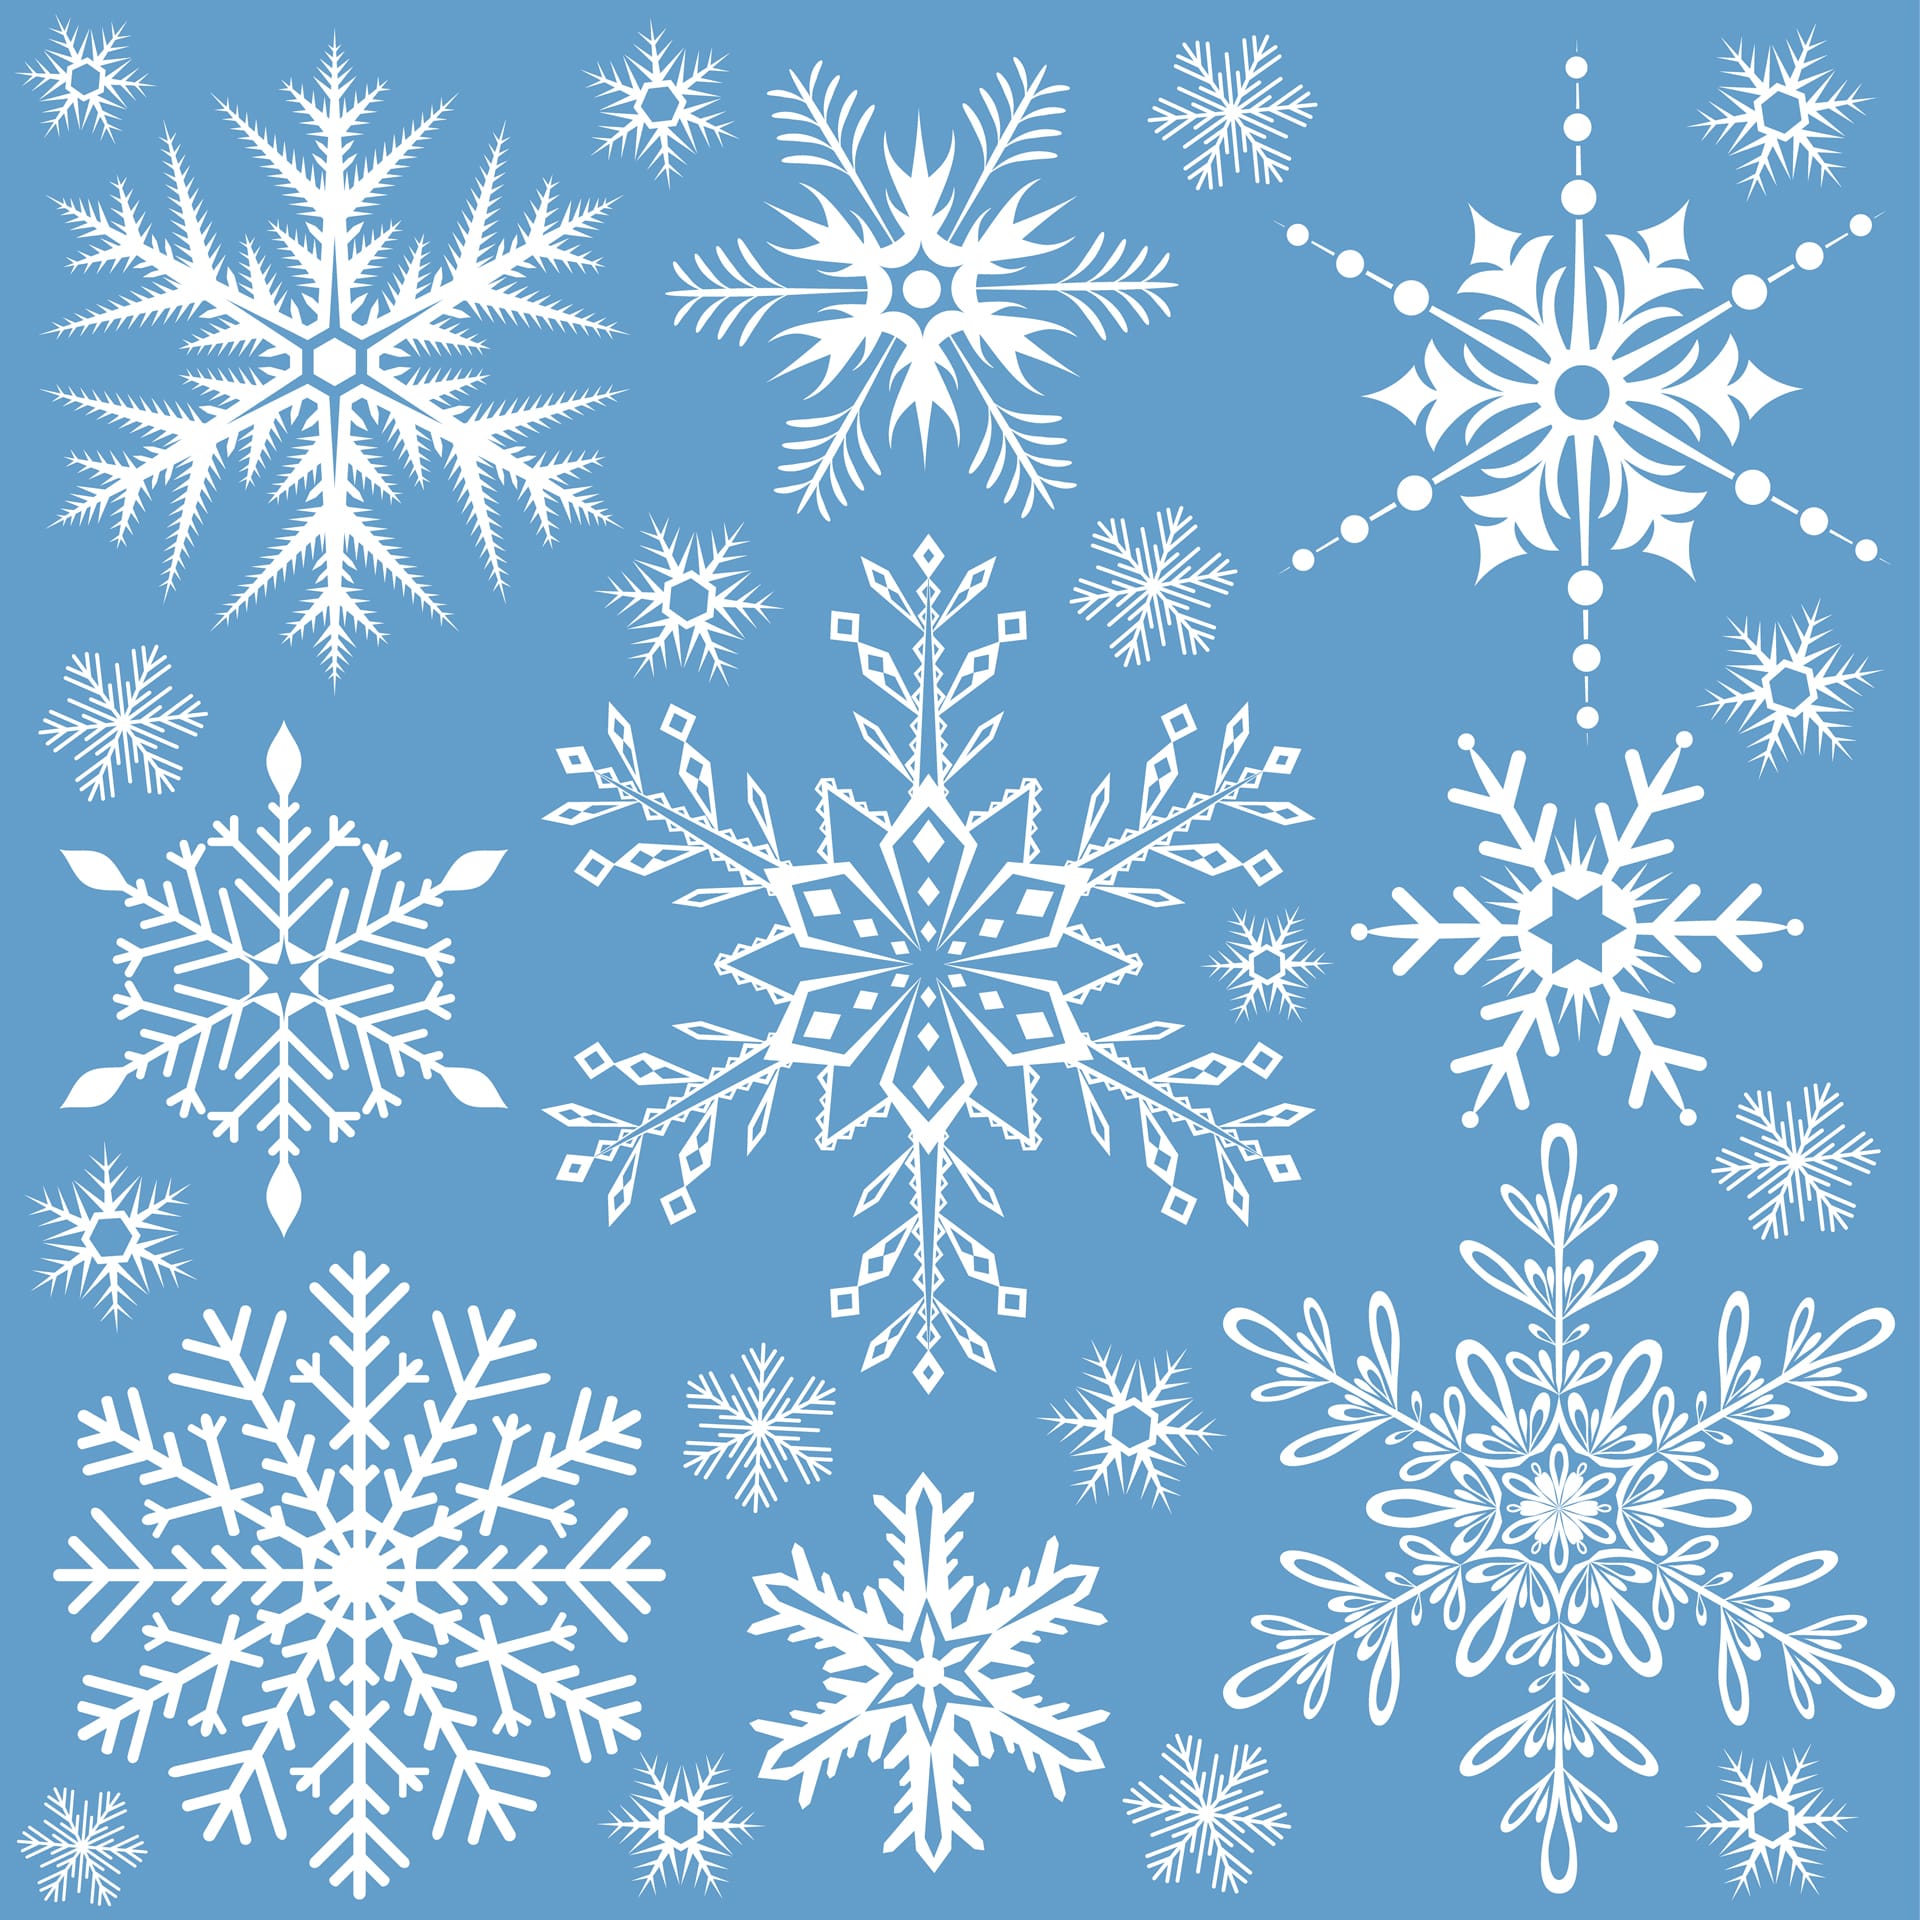 Snowflakes christmas set doodle outline illustration winter holidays elements holiday